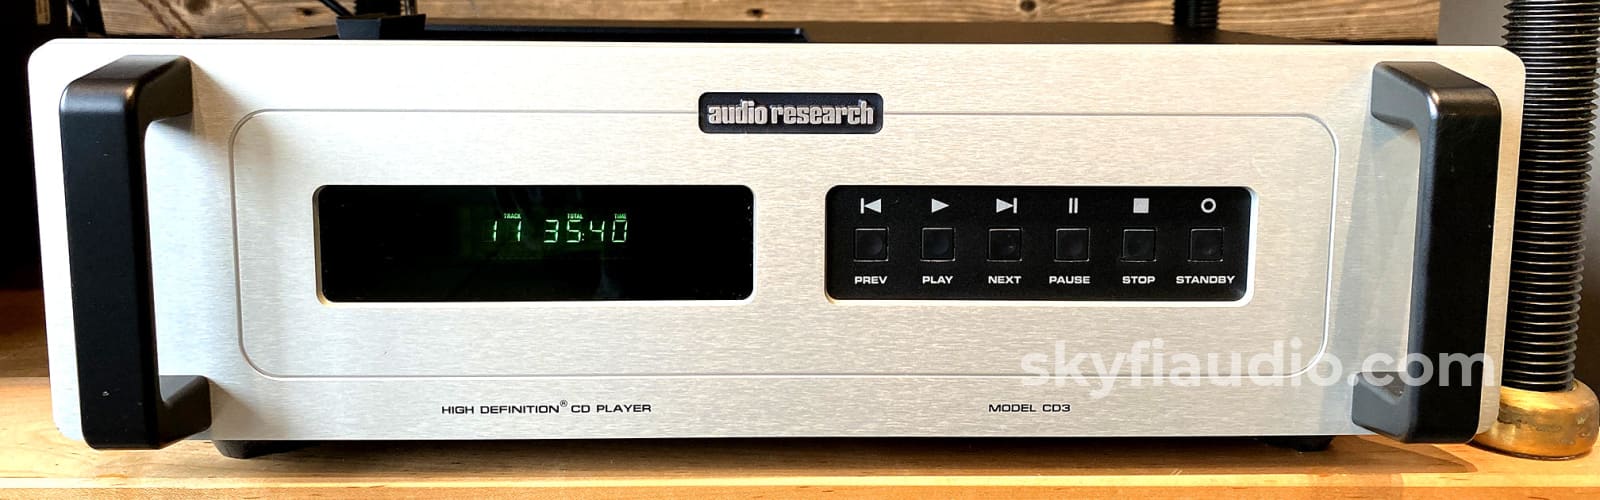 Audio Research Cd3 Mkii Cd Player - With Remote Manual And Box + Digital